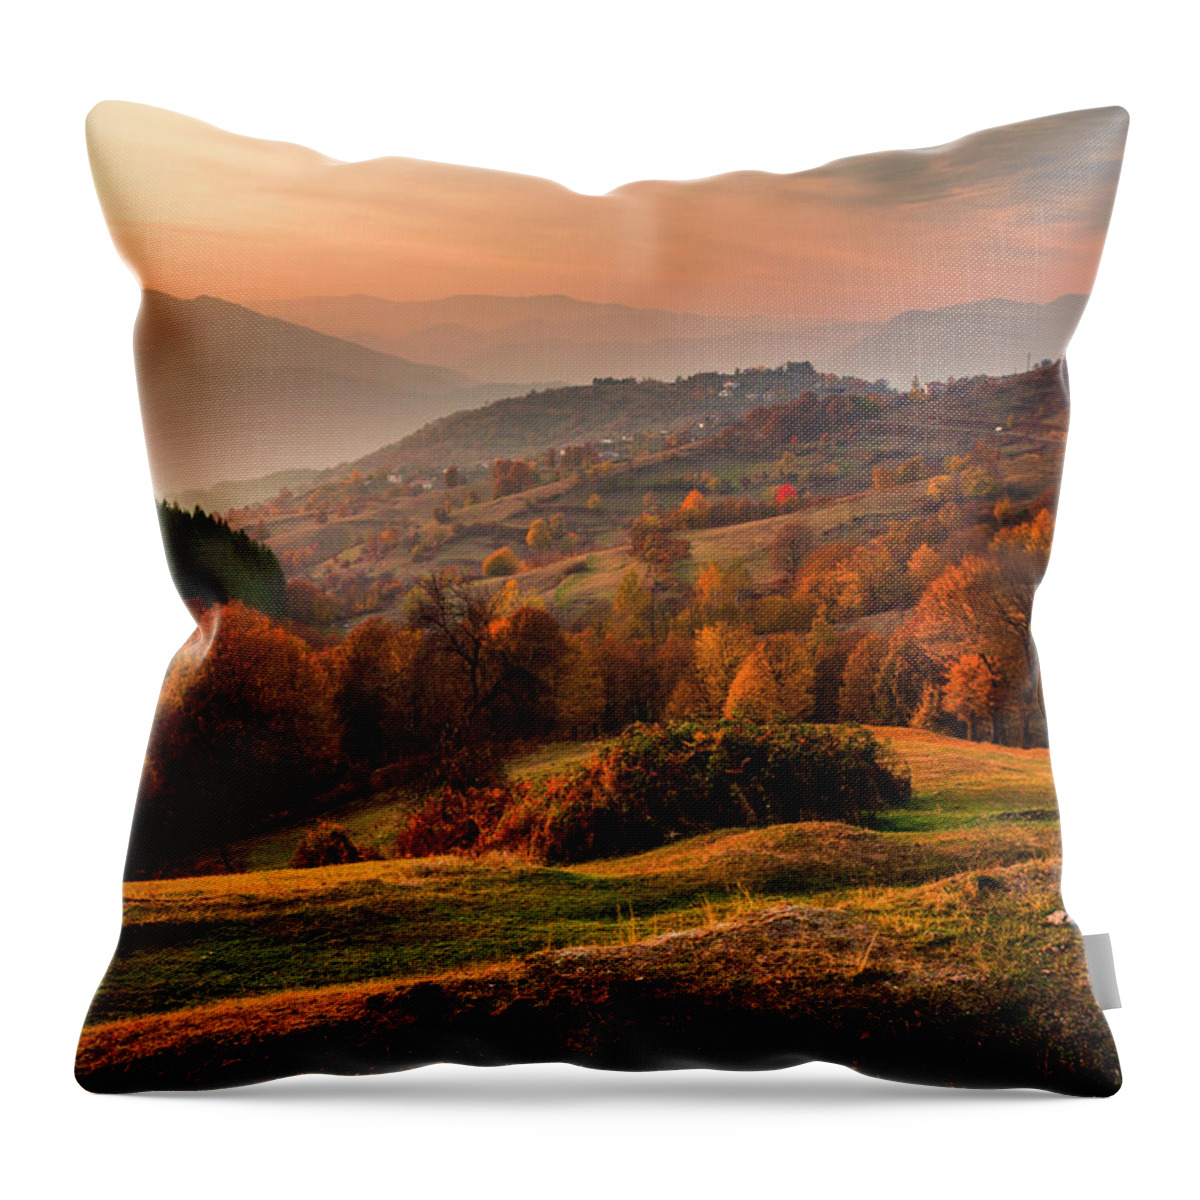 Rhodope Mountains Throw Pillow featuring the photograph Rhodopean Landscape by Evgeni Dinev